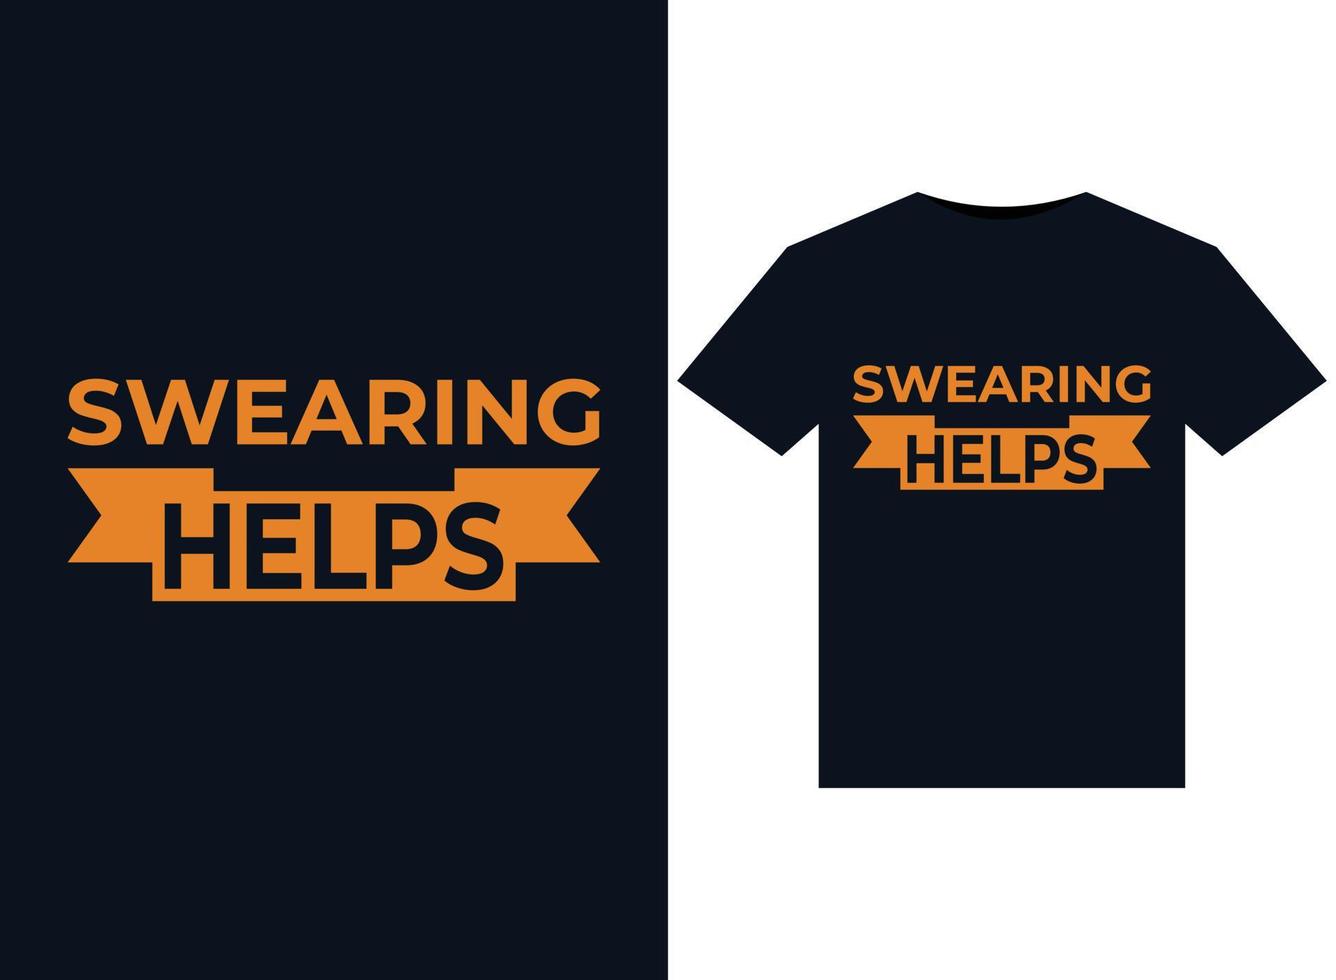 Swearing Helps illustrations for print-ready T-Shirts design vector